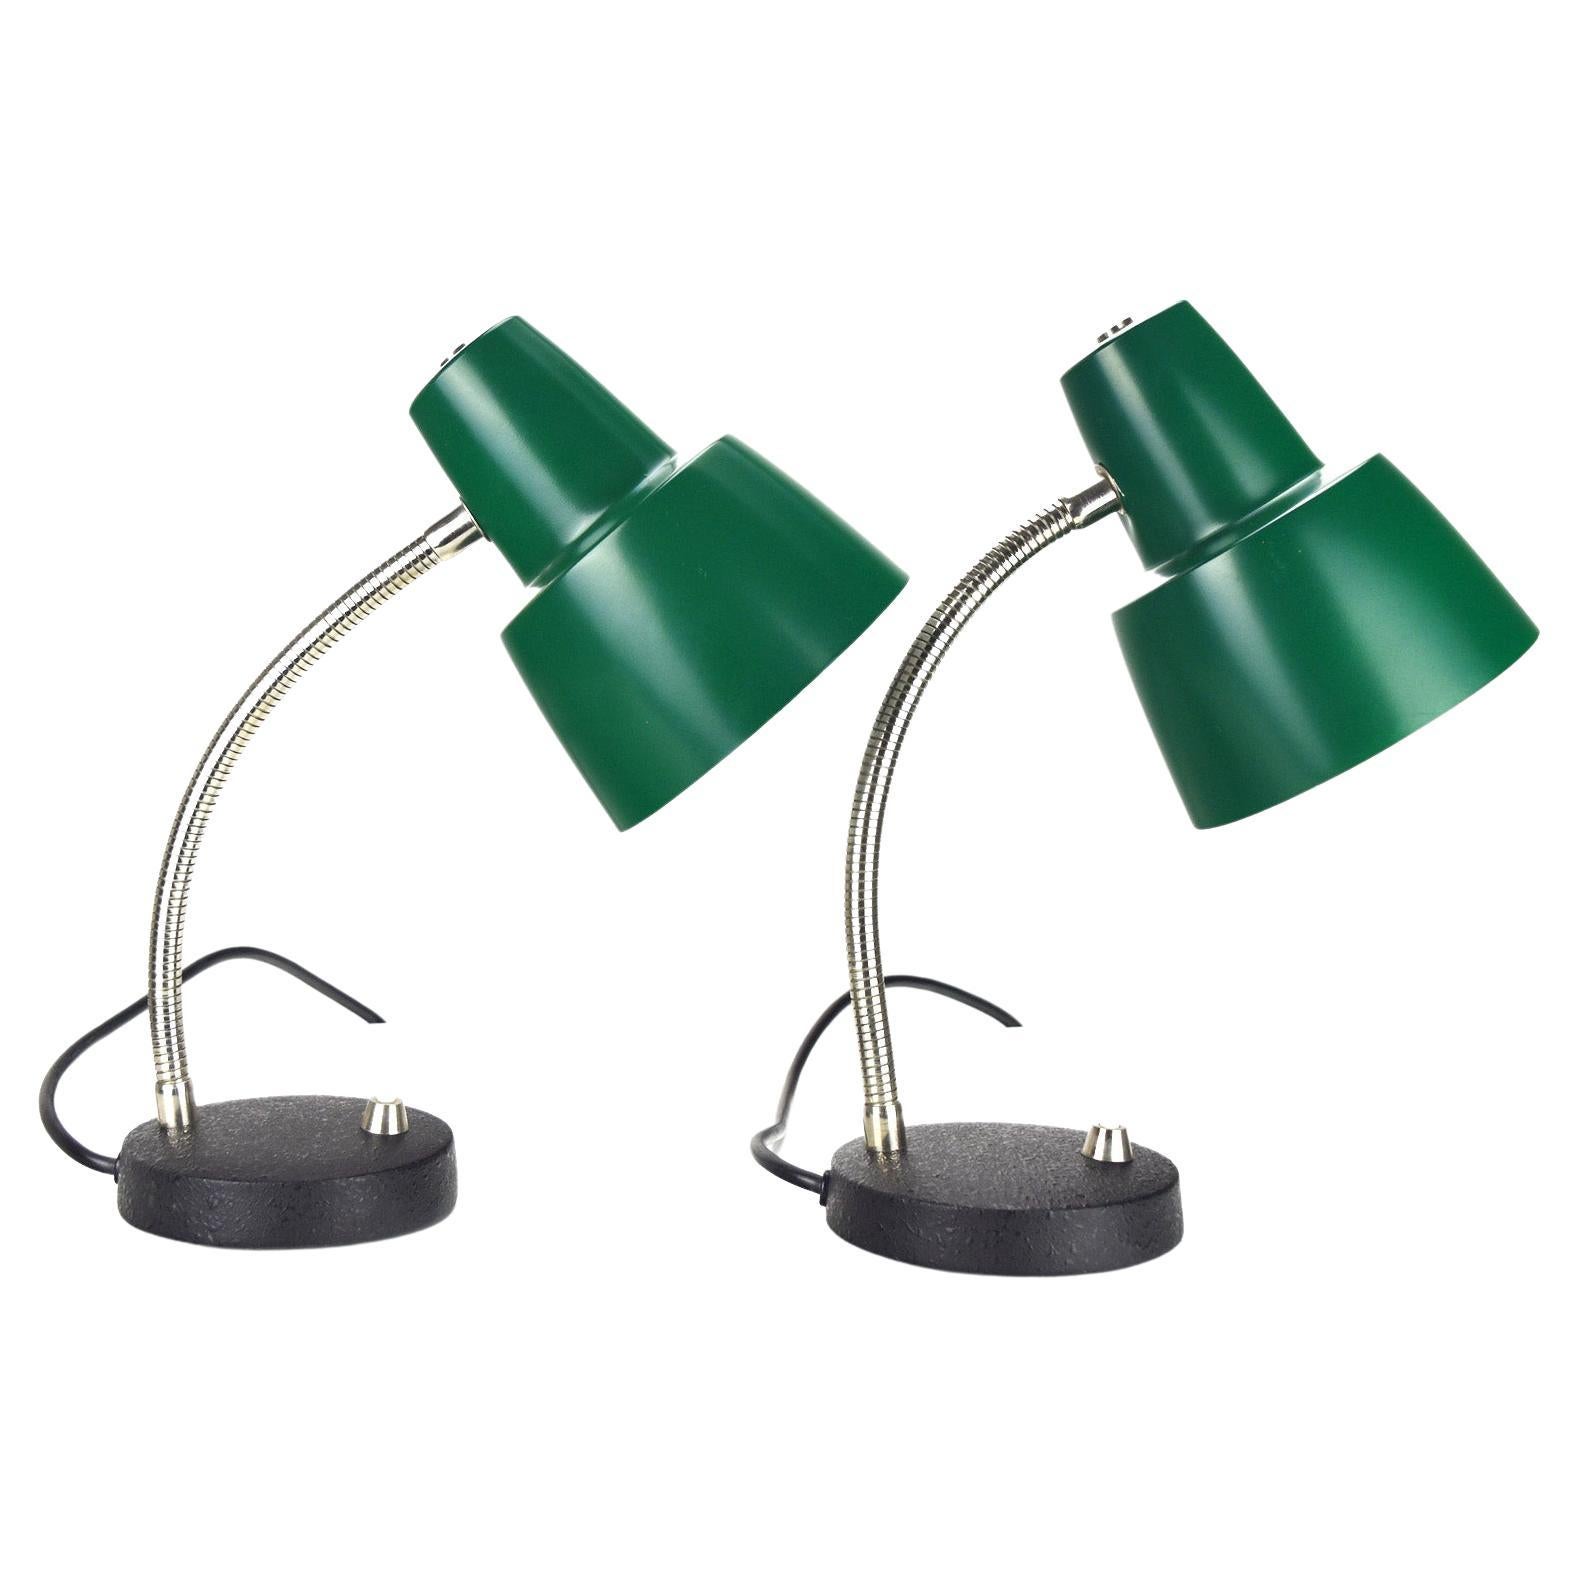 Vintage Pair of Bed Side Table Lamps by Hillebrand 1960s German Green Lacquered